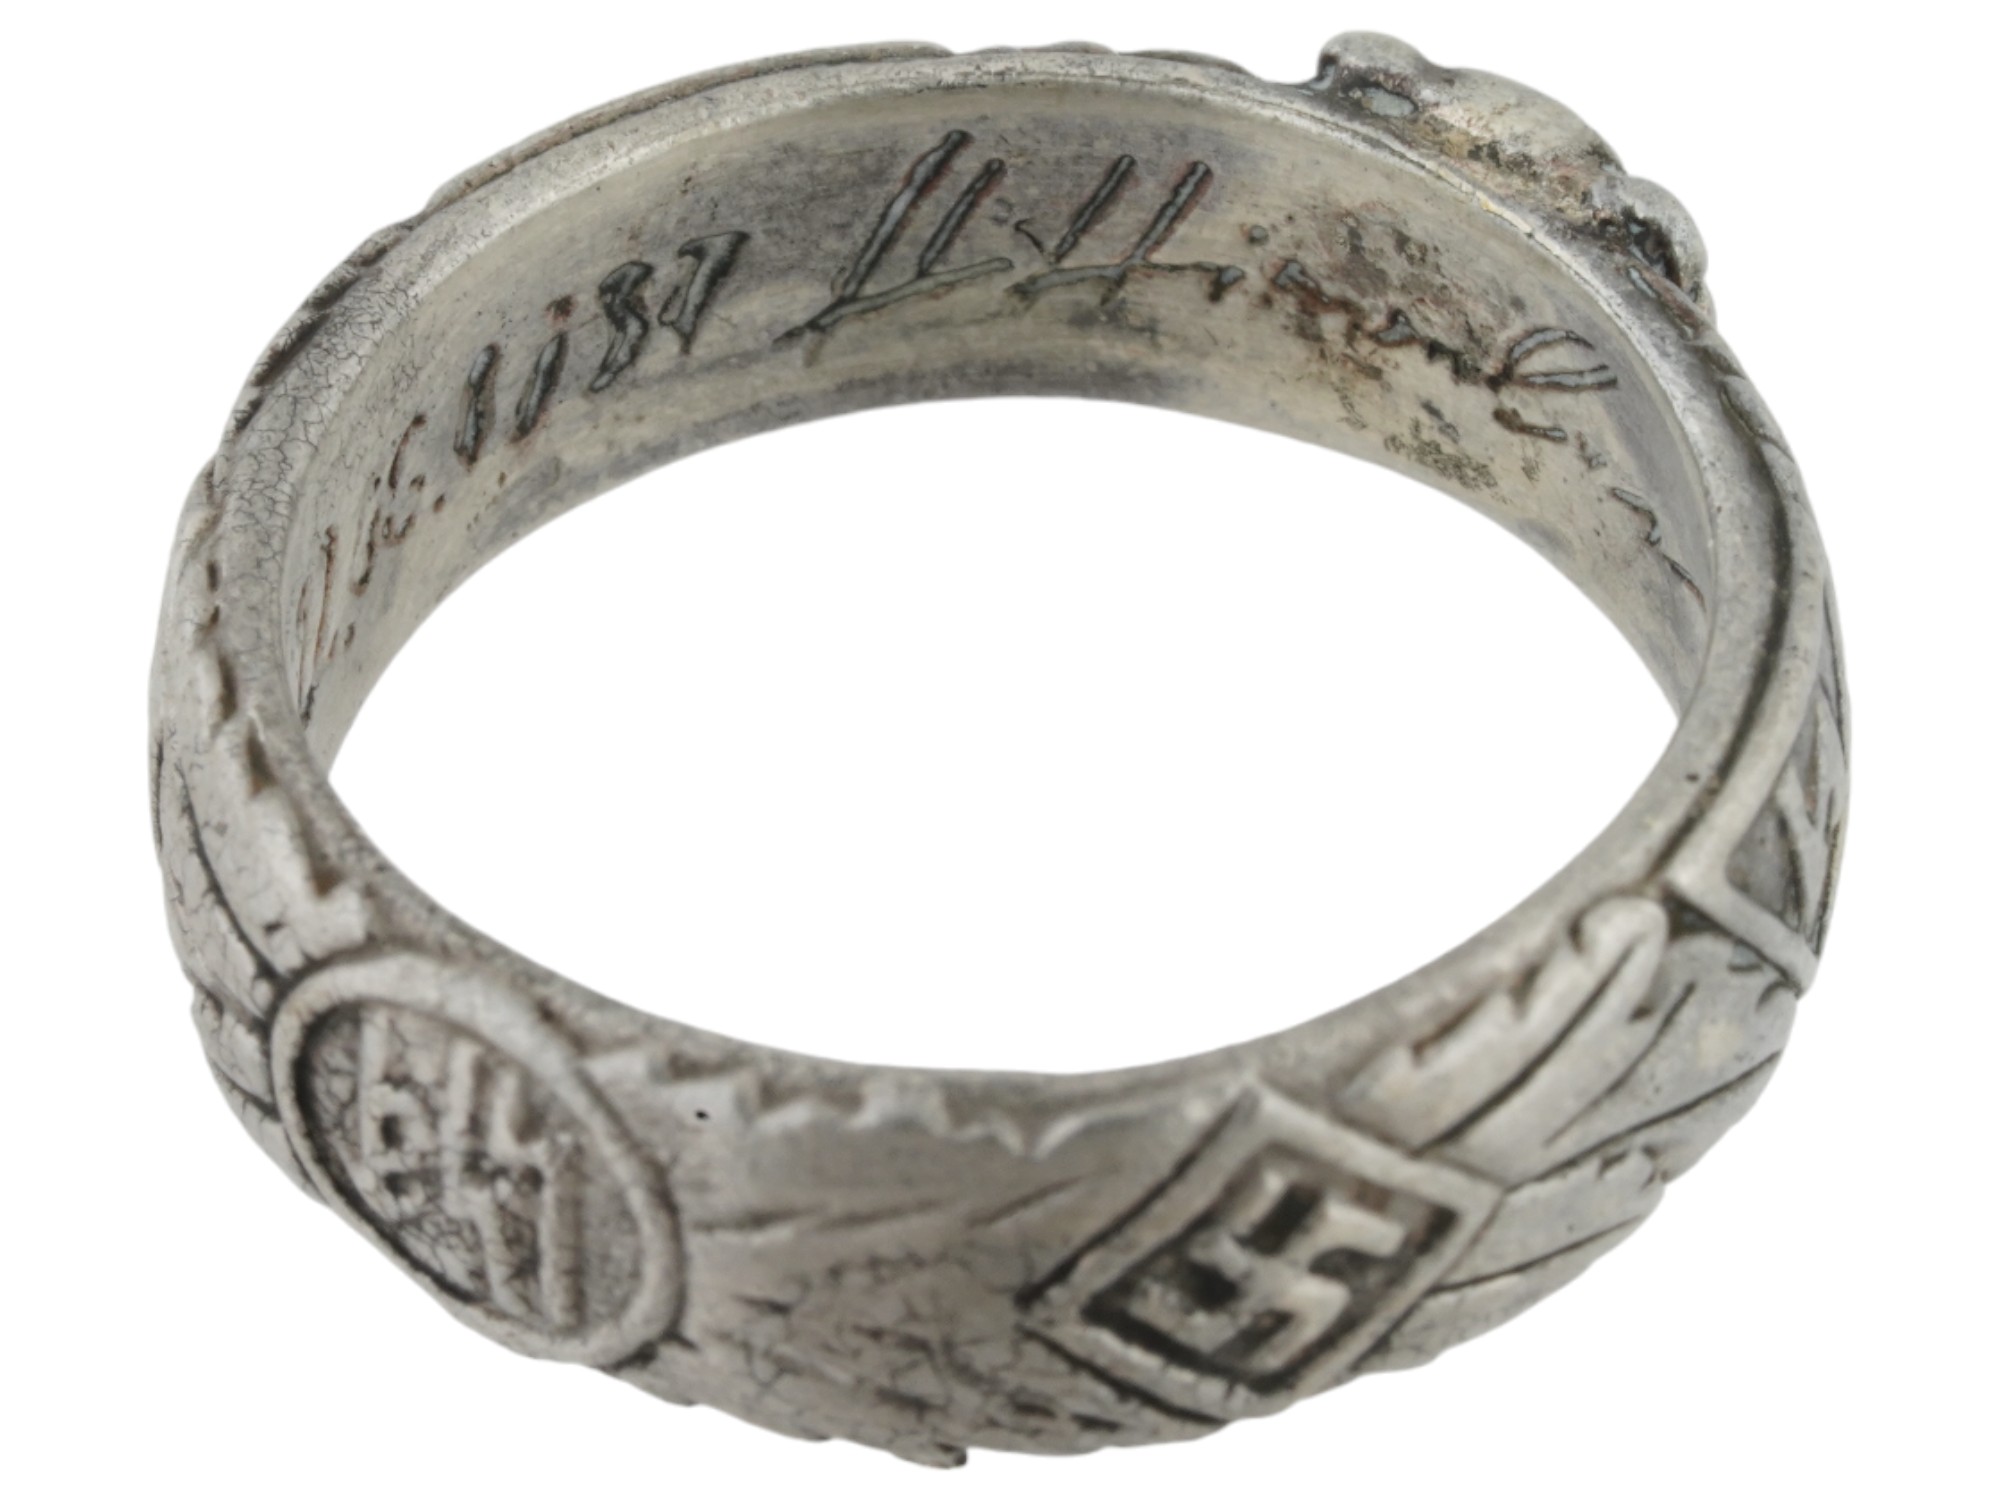 WWII NAZI GERMAN 3RD REICH SS HIMMLER HONOR TYPE RING PIC-3